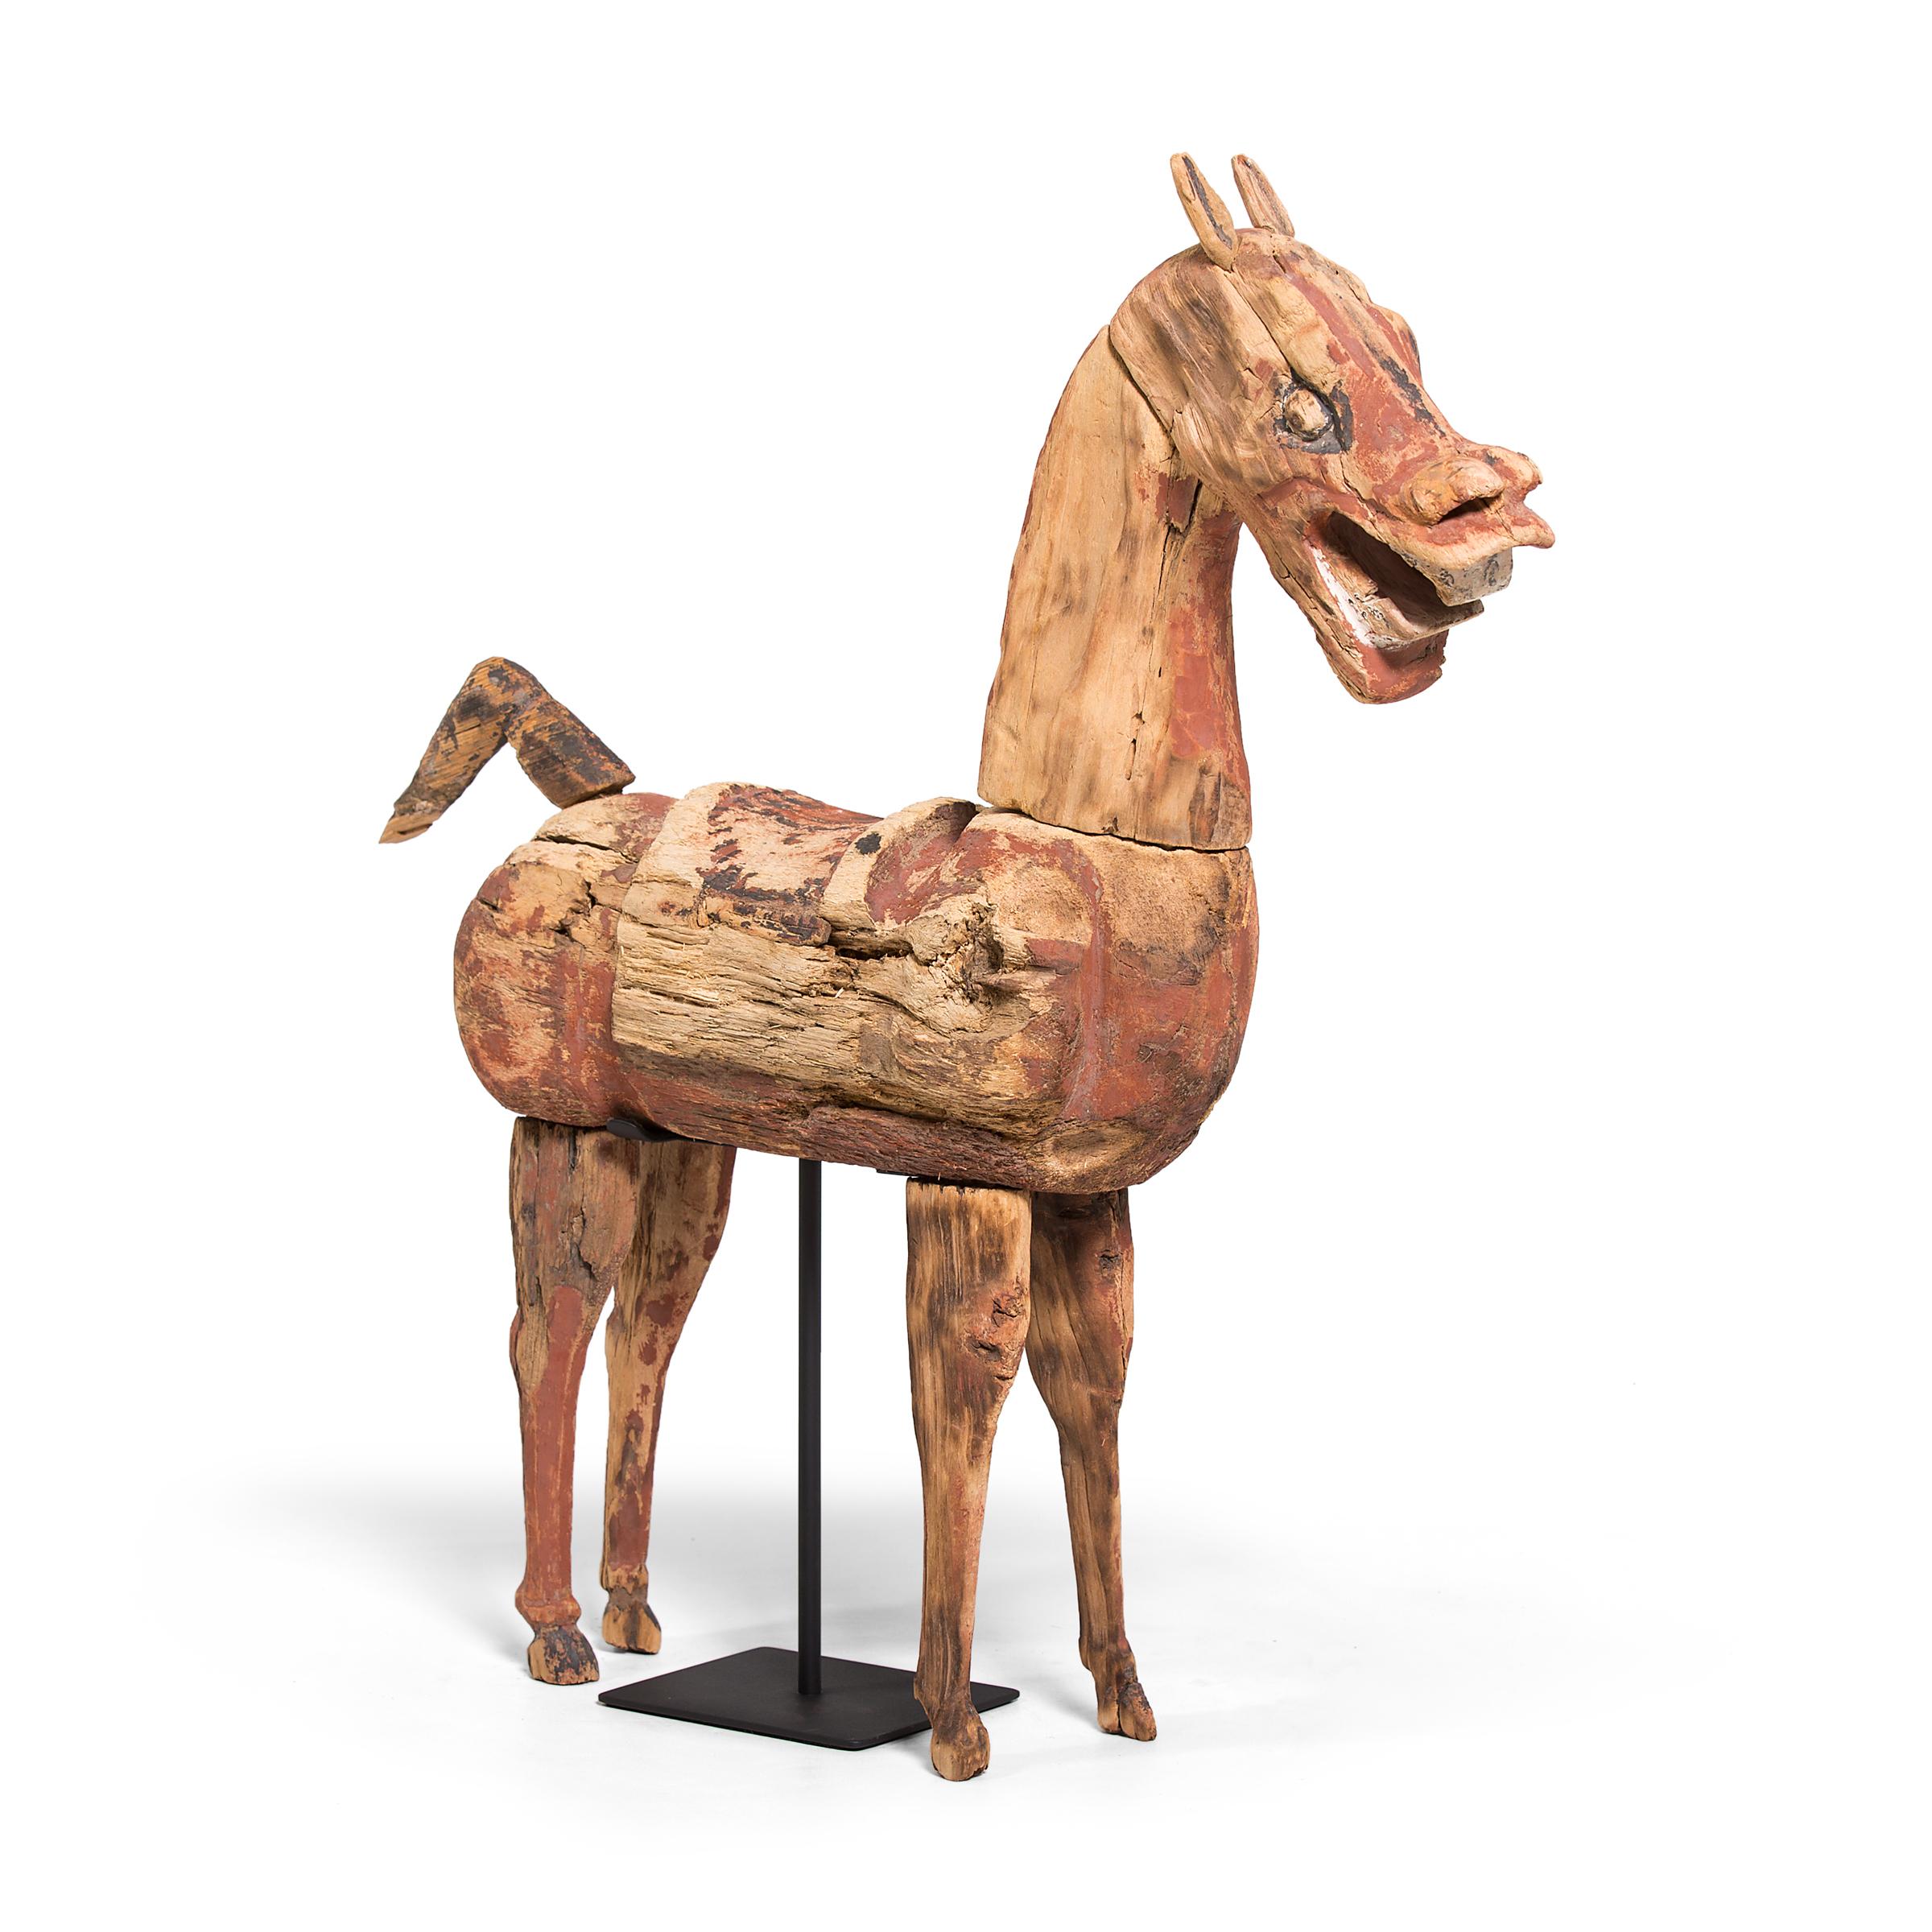 This hand carved Chinese wooden horse is a type of centuries-old burial figurine known as míngqì. Depicting the pleasures of daily life, míngqì figurines were offerings to one's spirit to ensure comfort and special treatment in the afterlife. Míngqì